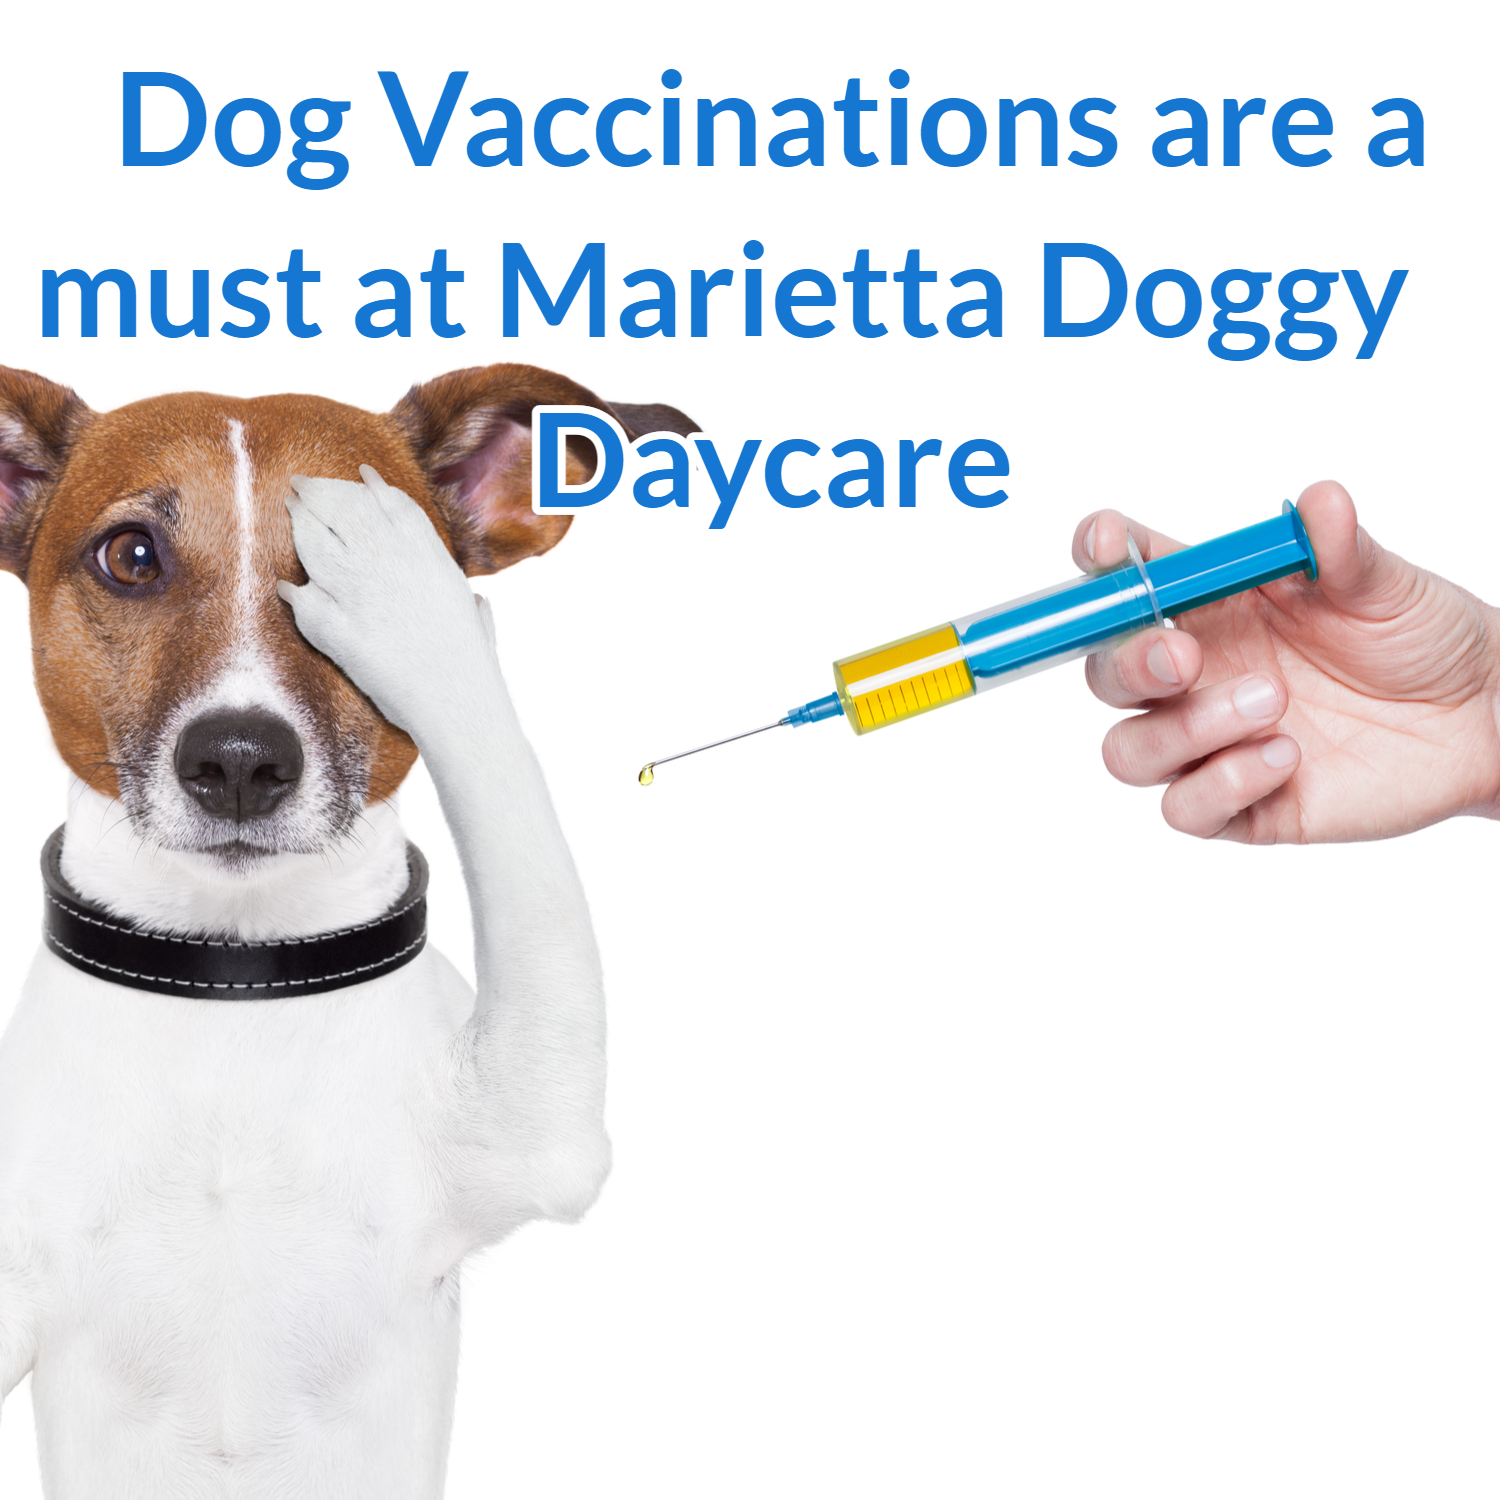 Marietta Doggy Daycare has strict rules for vaccinations and pets